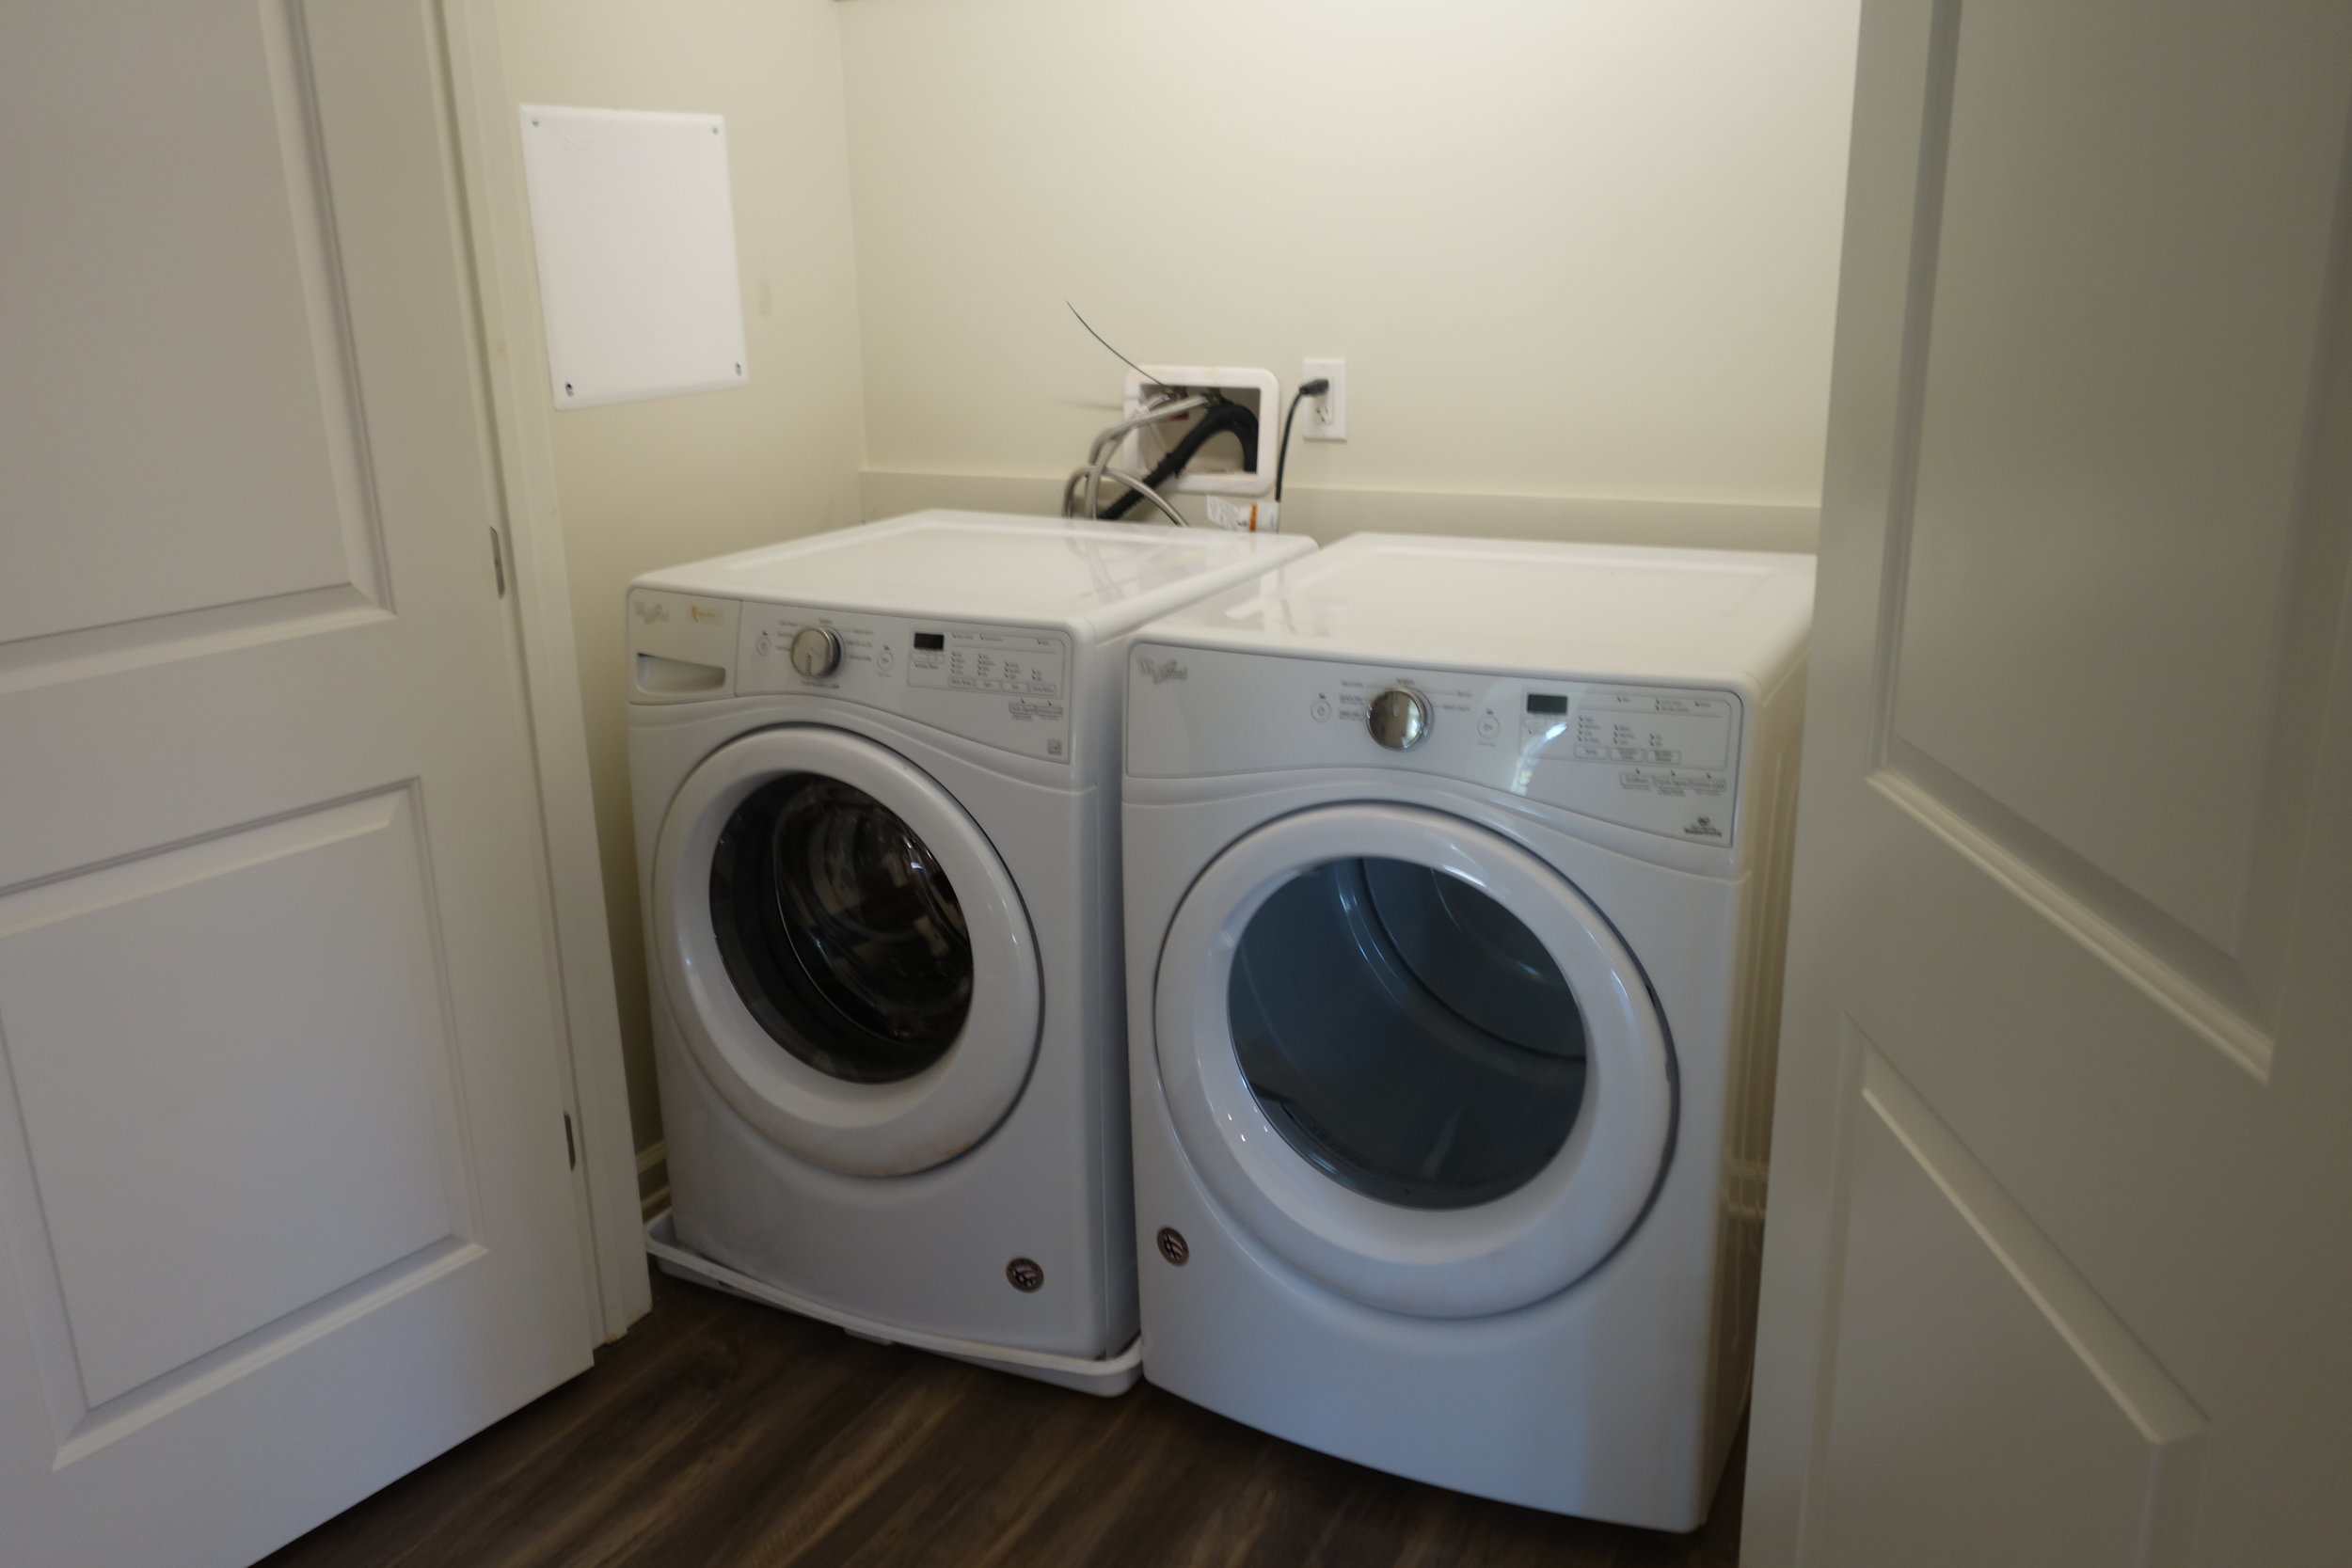 Washer and dryer in a large closet